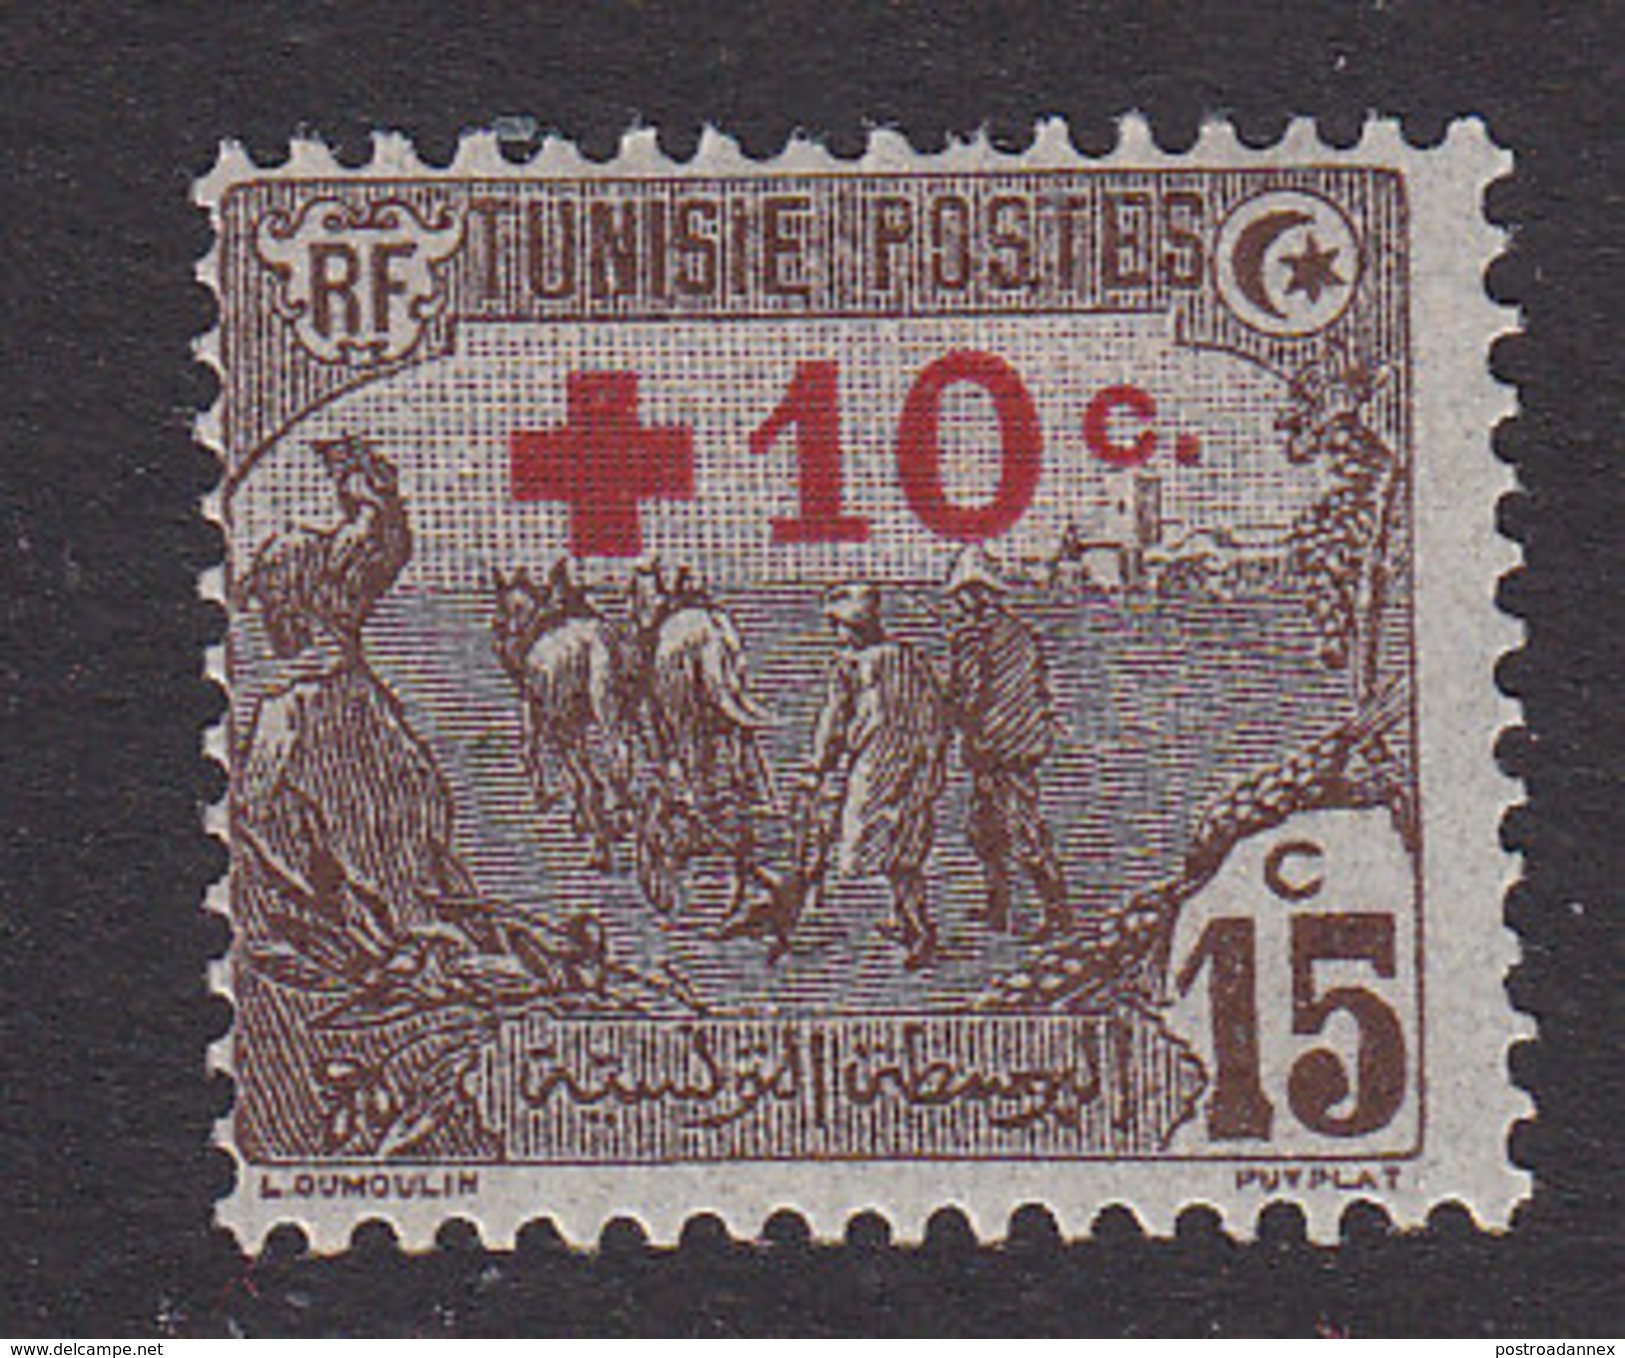 Tunisia, Scott #B3 Mint Hinged, Plowing Surcharged, Issued 1916 - Unused Stamps